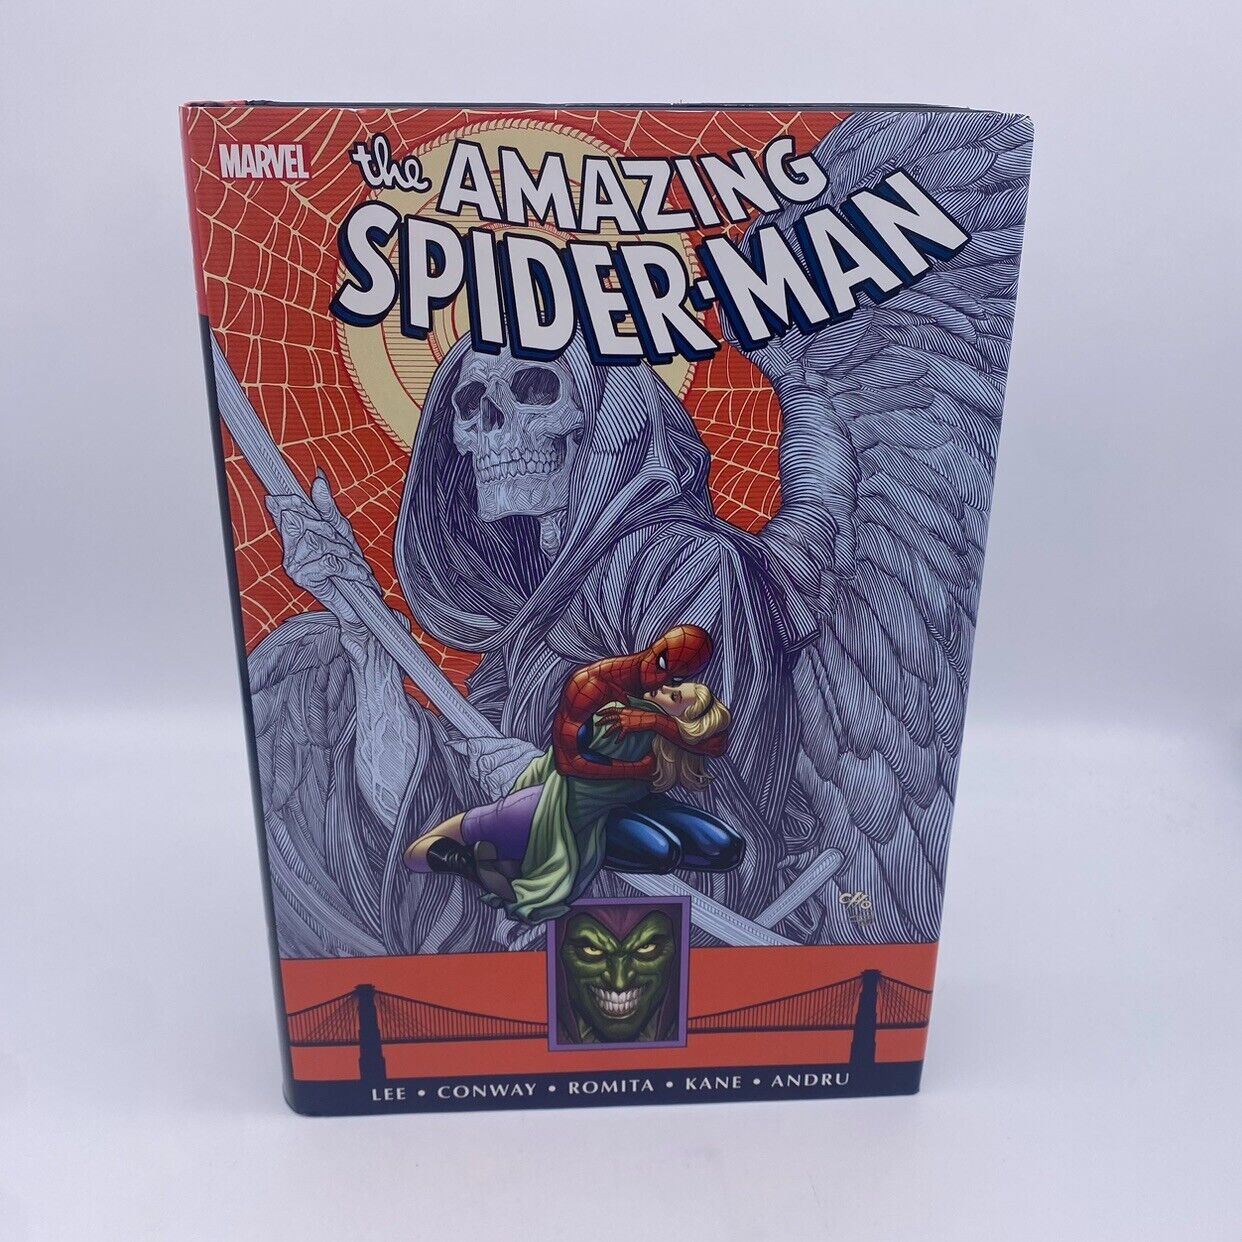 The Amazing Spider-Man Omnibus Vol. 4 First Edition First Printing Hardcover